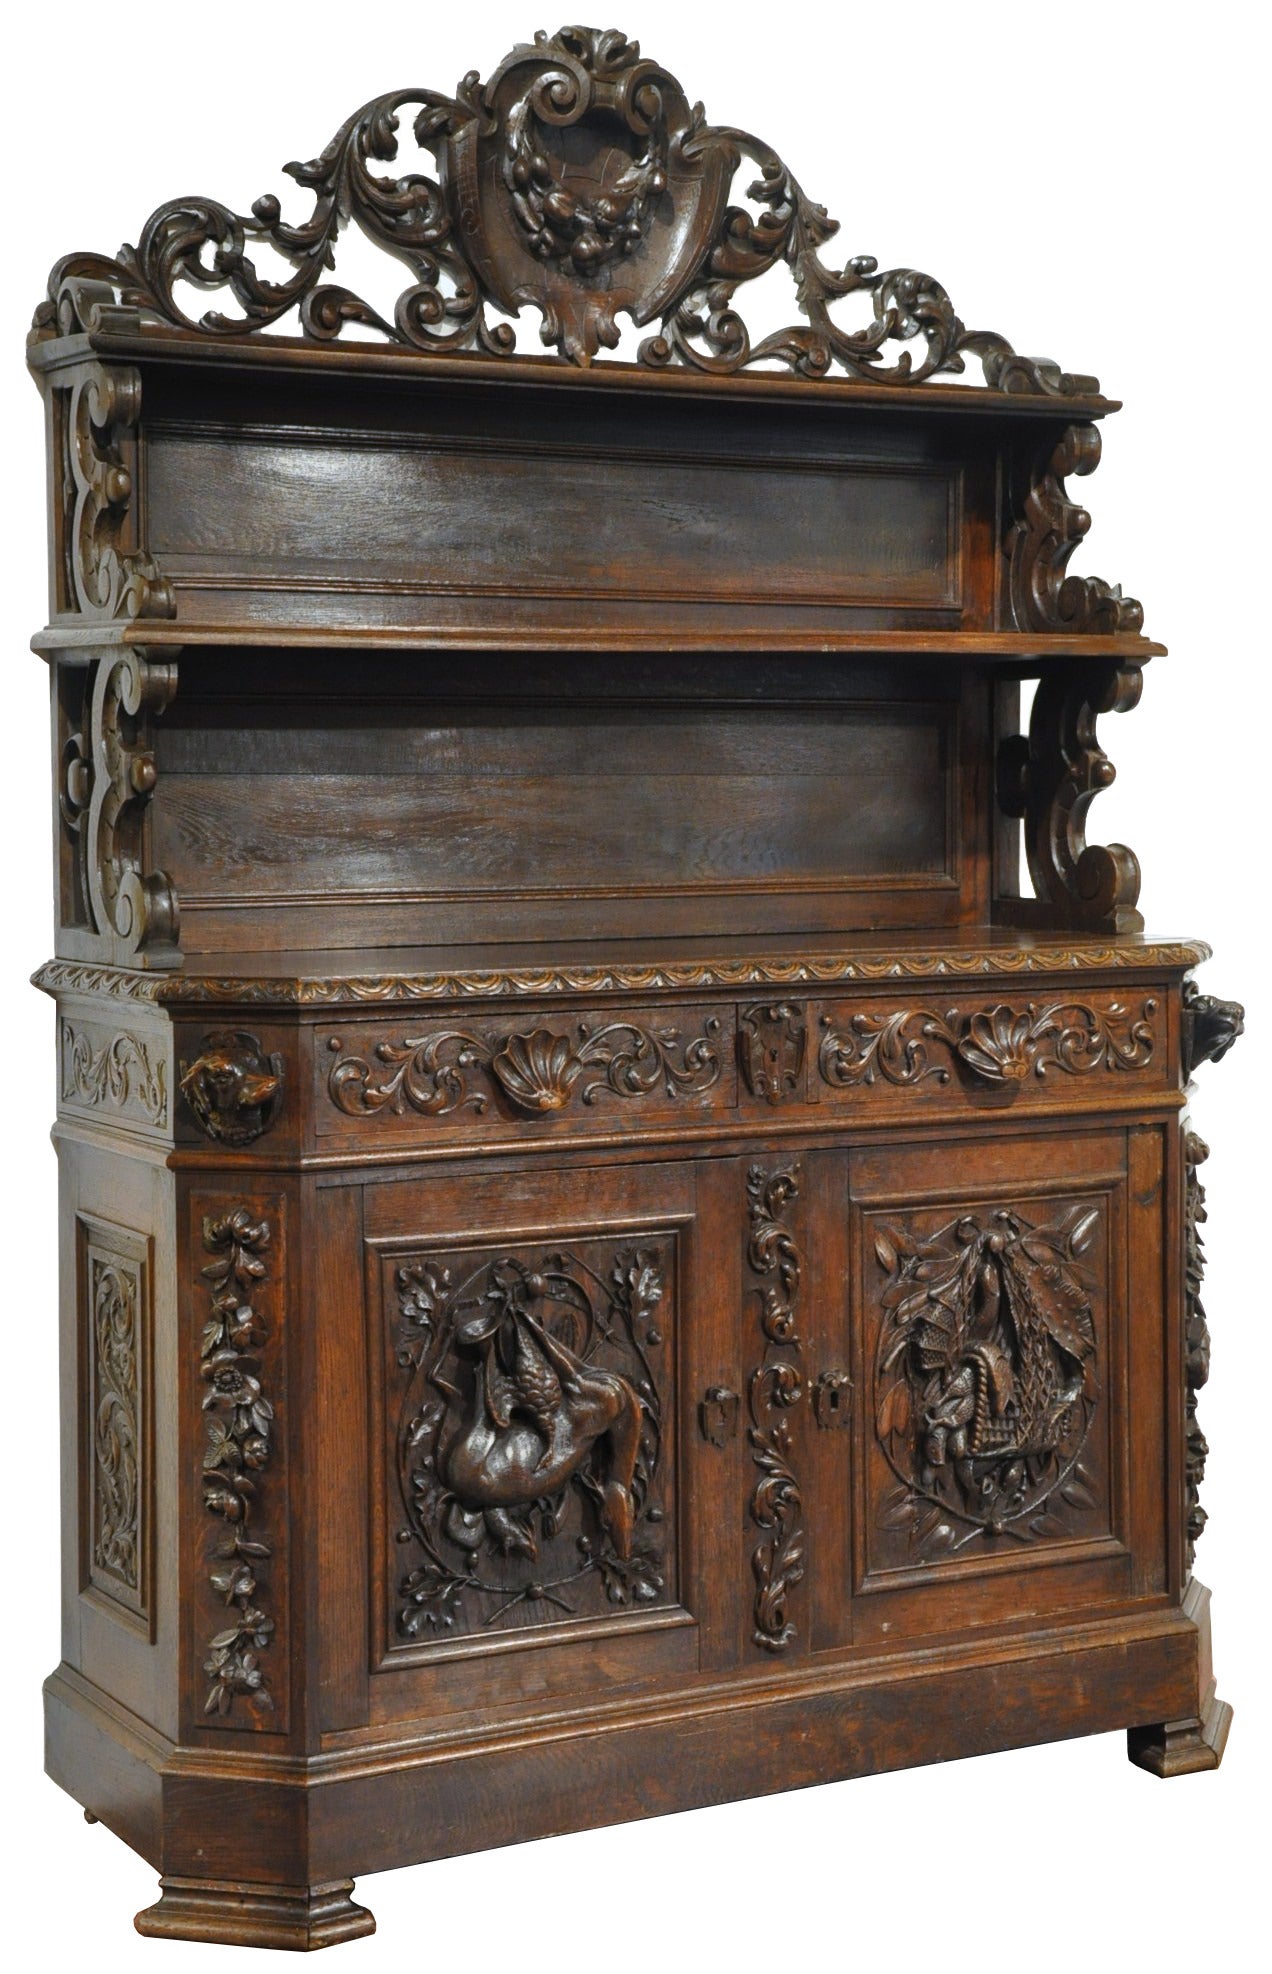 This elegant, two-piece antique display cabinet was crafted in France, circa 1870. The ornate buffet features a double display shelving on the top, and two doors with drawers at the base revealing inside shelf for extra storage. The buffet is